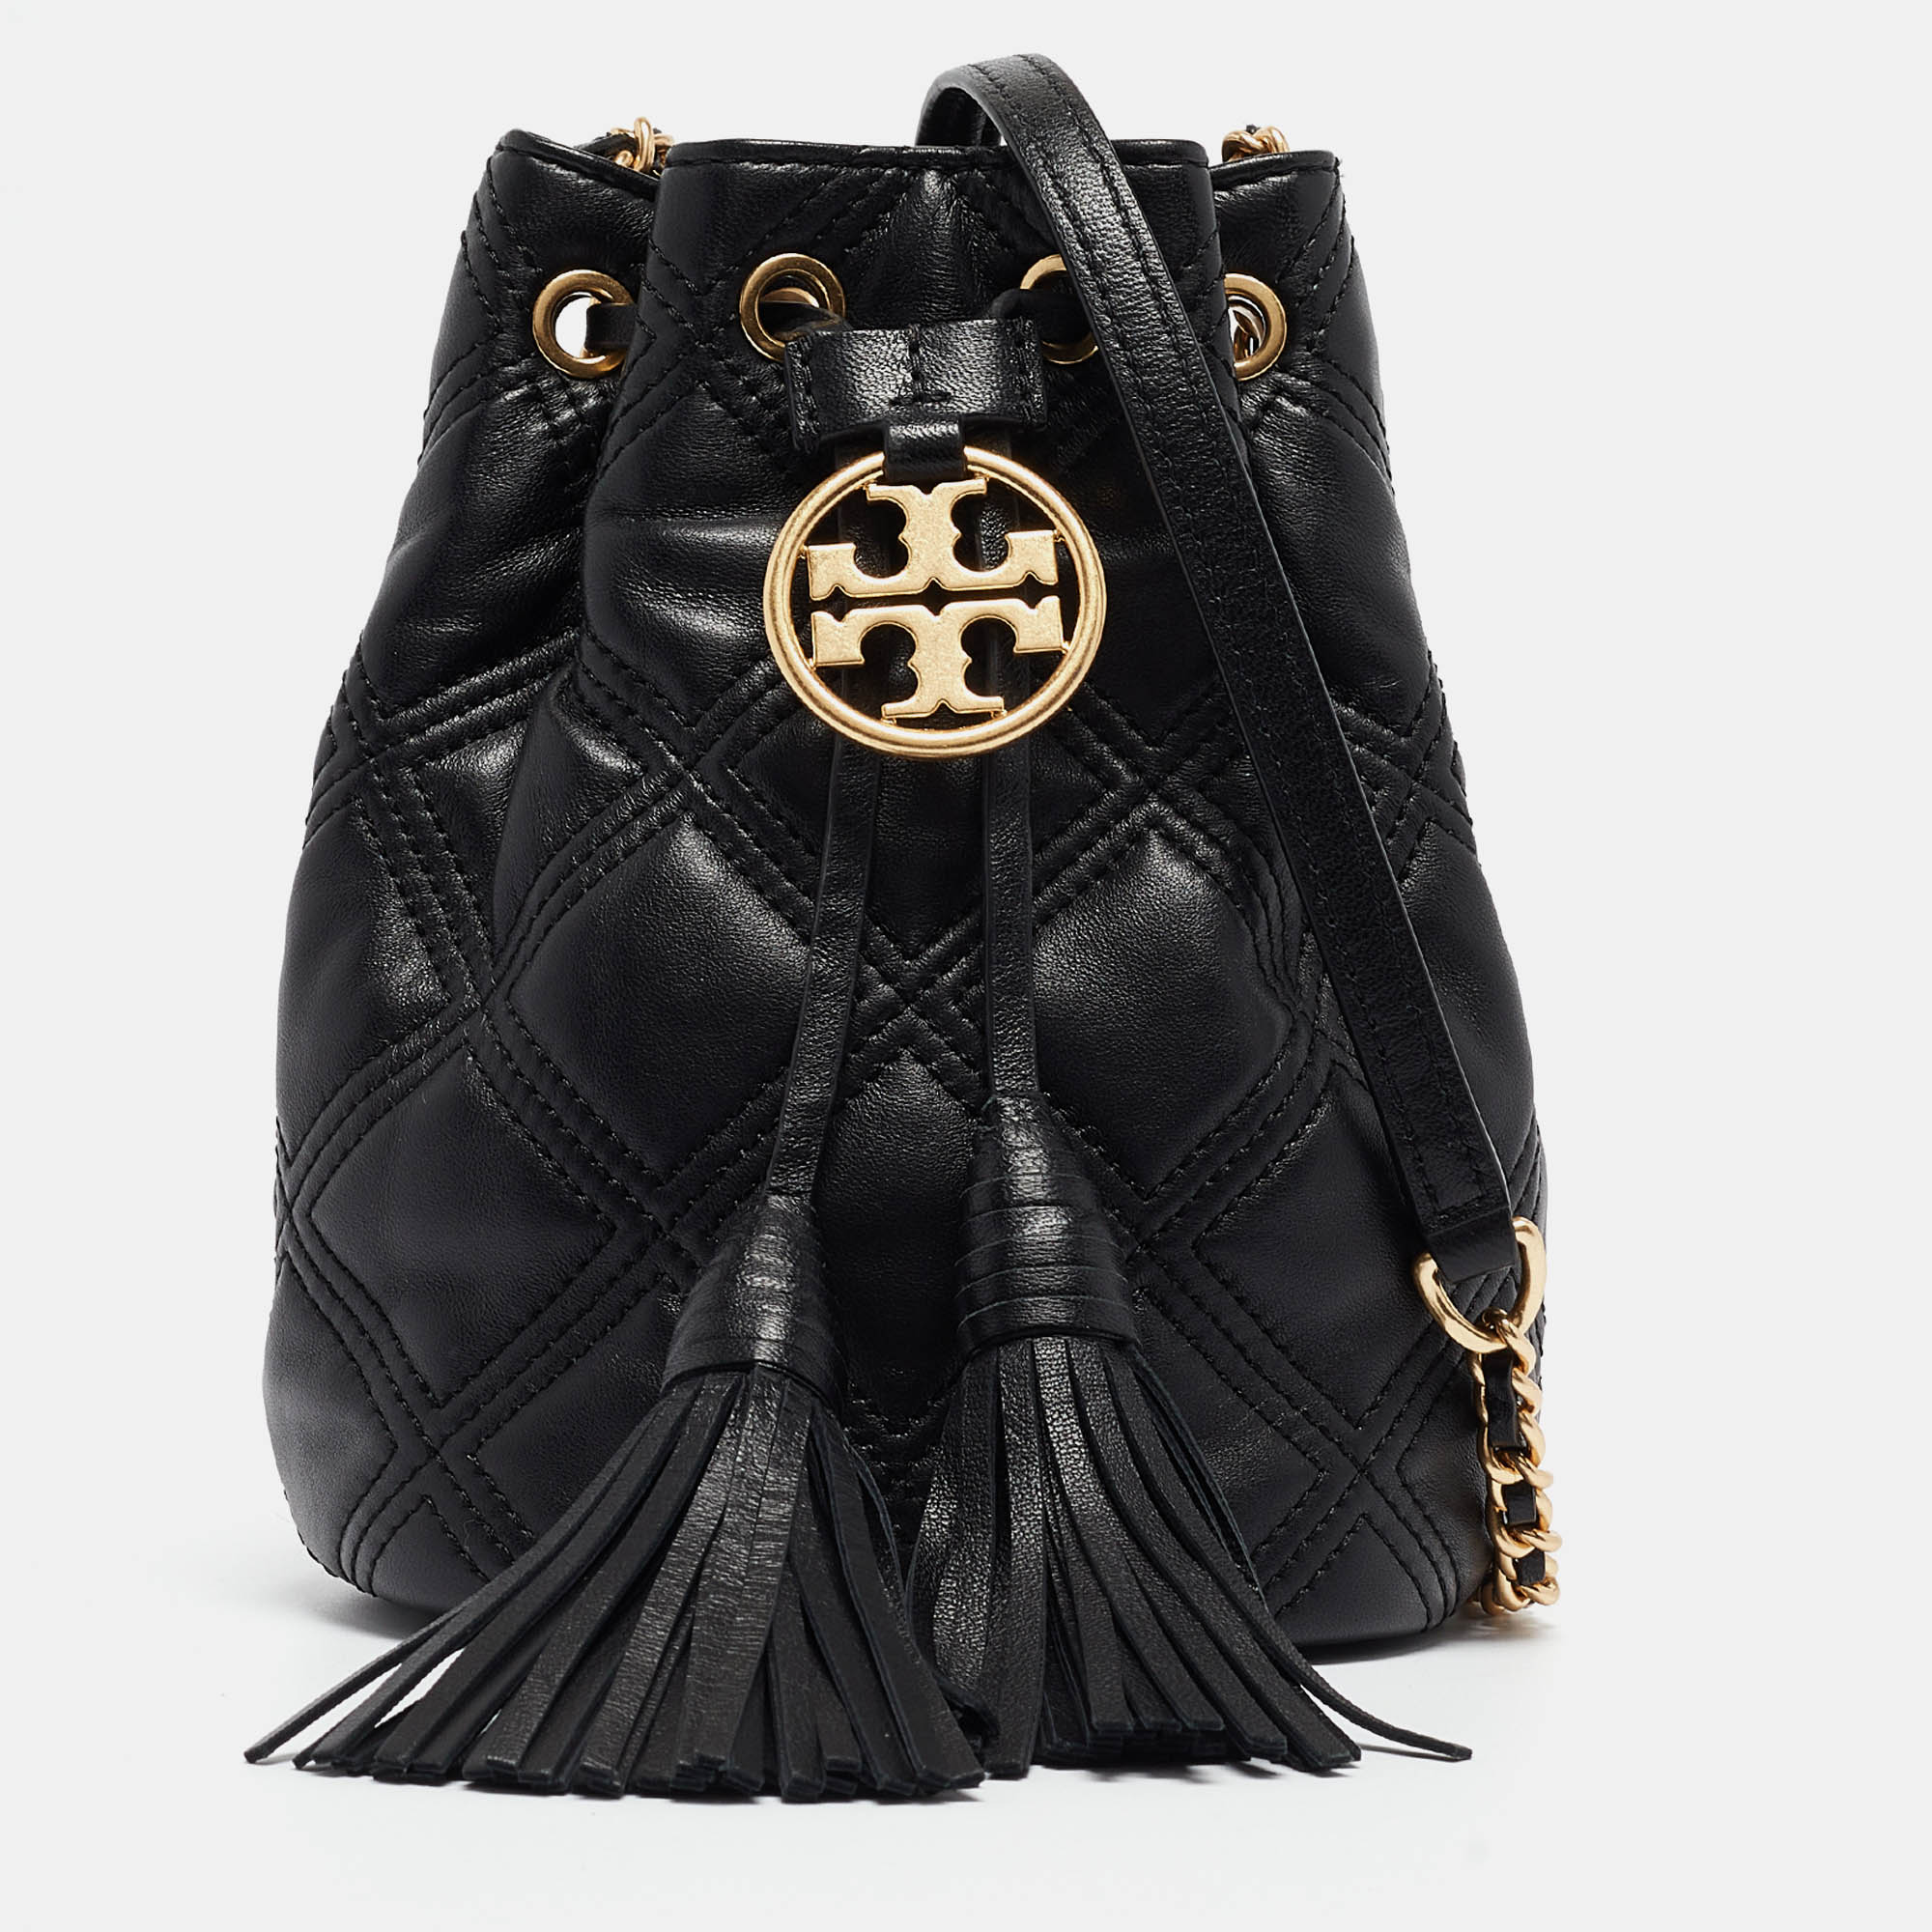 

Tory Burch Black Quilted Leather Mini Soft Fleming Bucket Bag